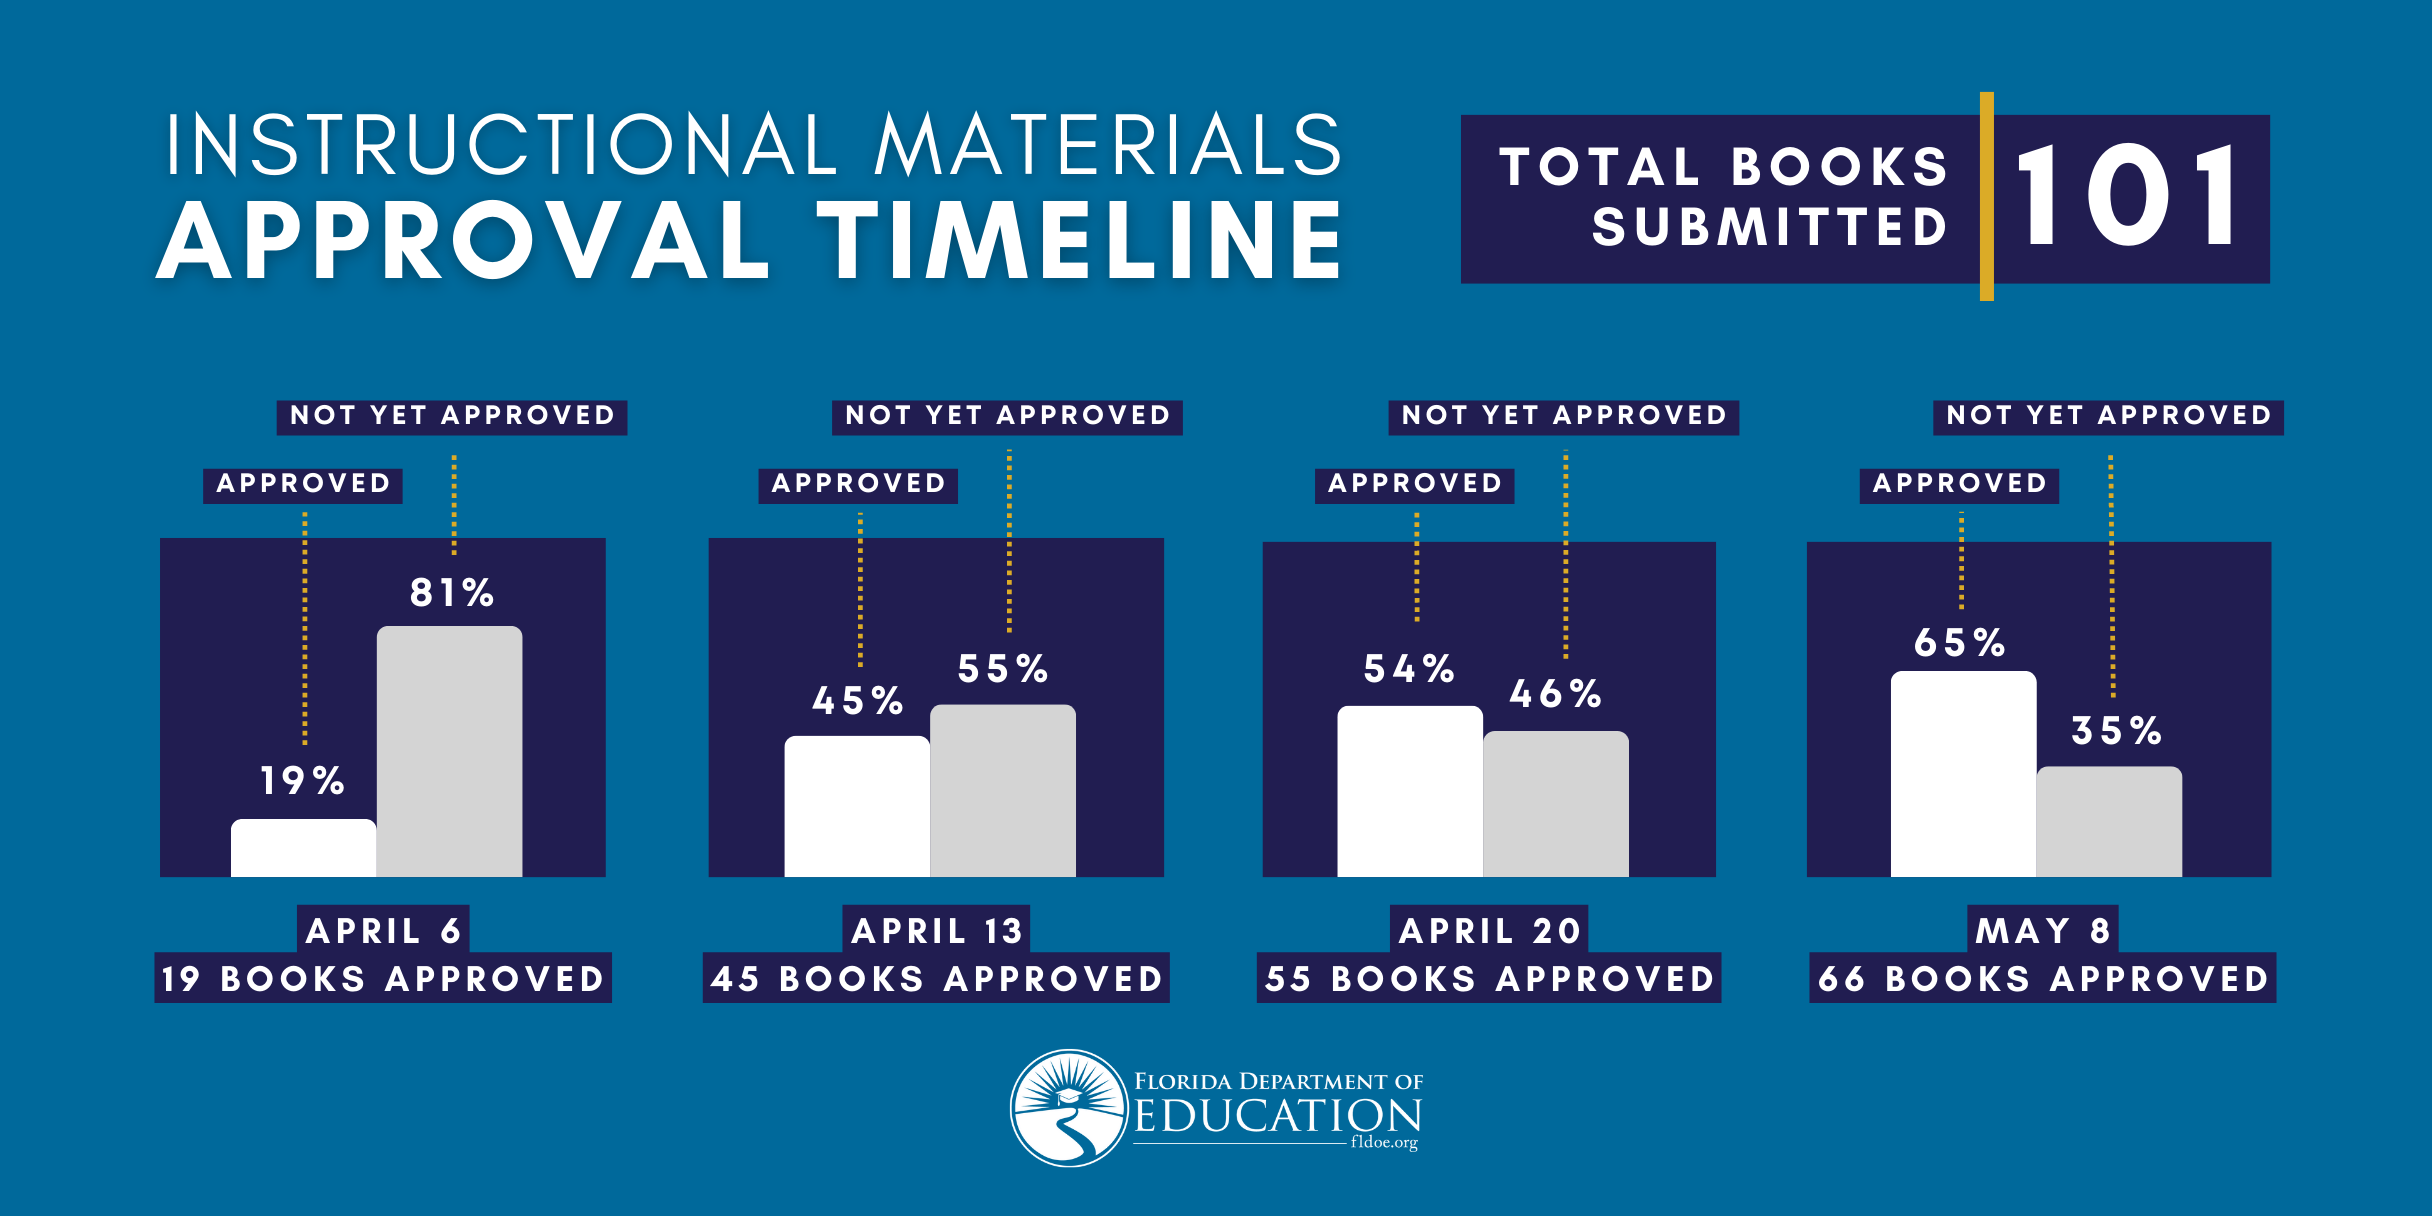 Instructional Materials Approval Timeline - Total Books submitted 101. April 6, 19 books approved. 19% approved, 81% not approved. April 13, 45 books approved. 45% approved, 55% not approved. April 20, 55 books approved. 54% approved, 46% not approved. May 8, 66 books approved. 65% approved, 35% not approved. 